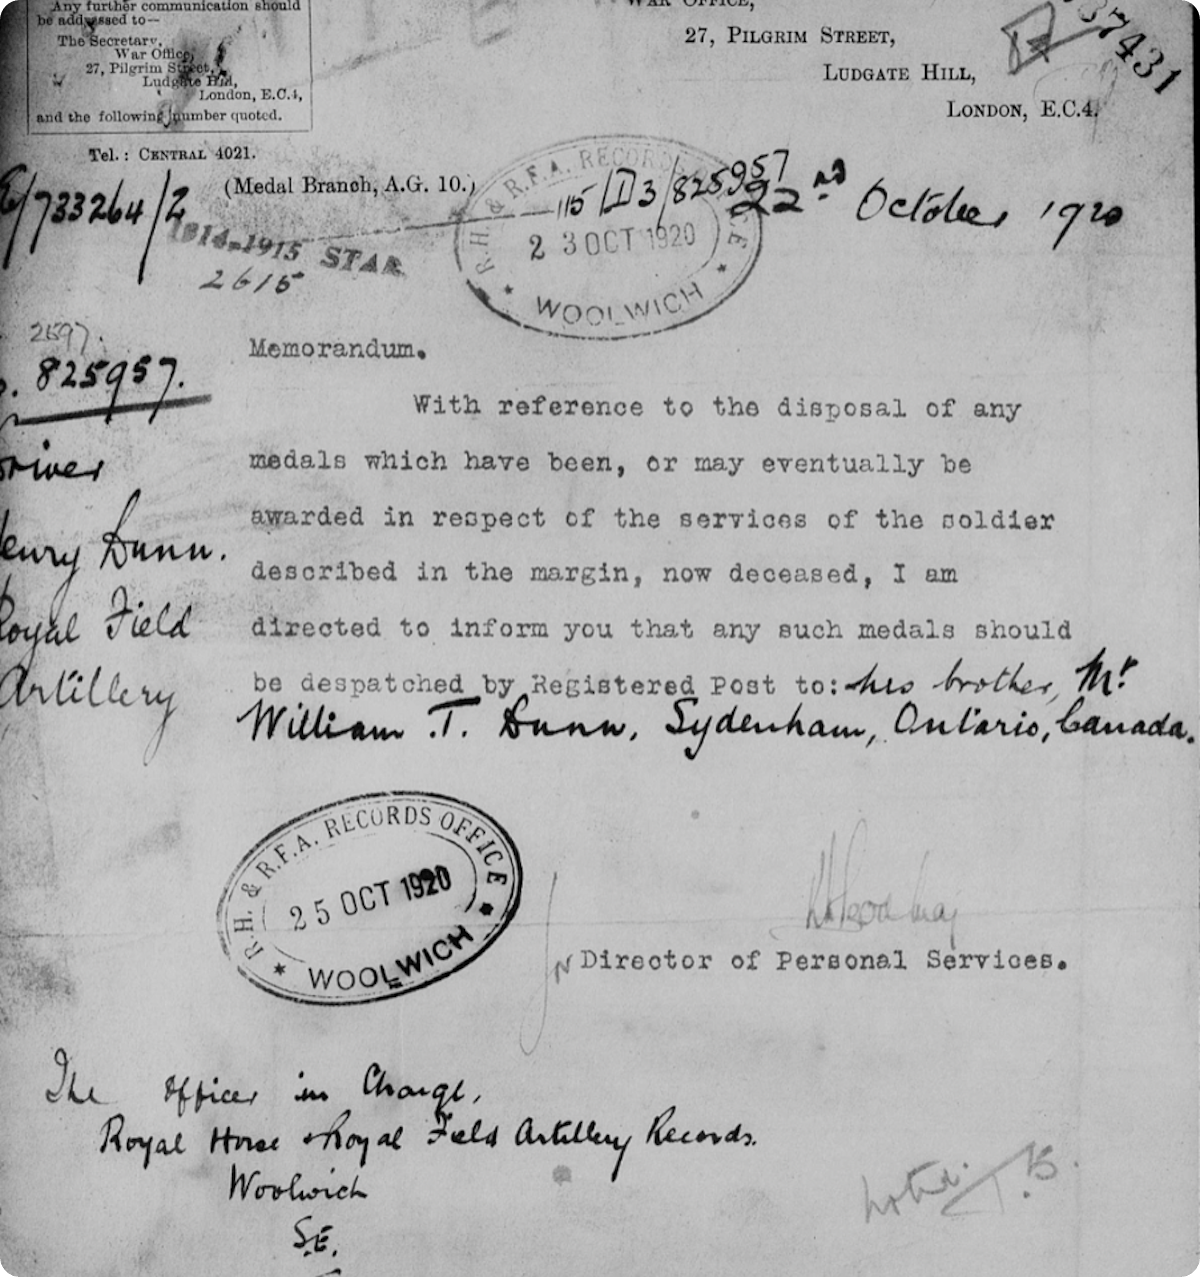 Harry’s service record confirms that his medals were sent to William in Canada.